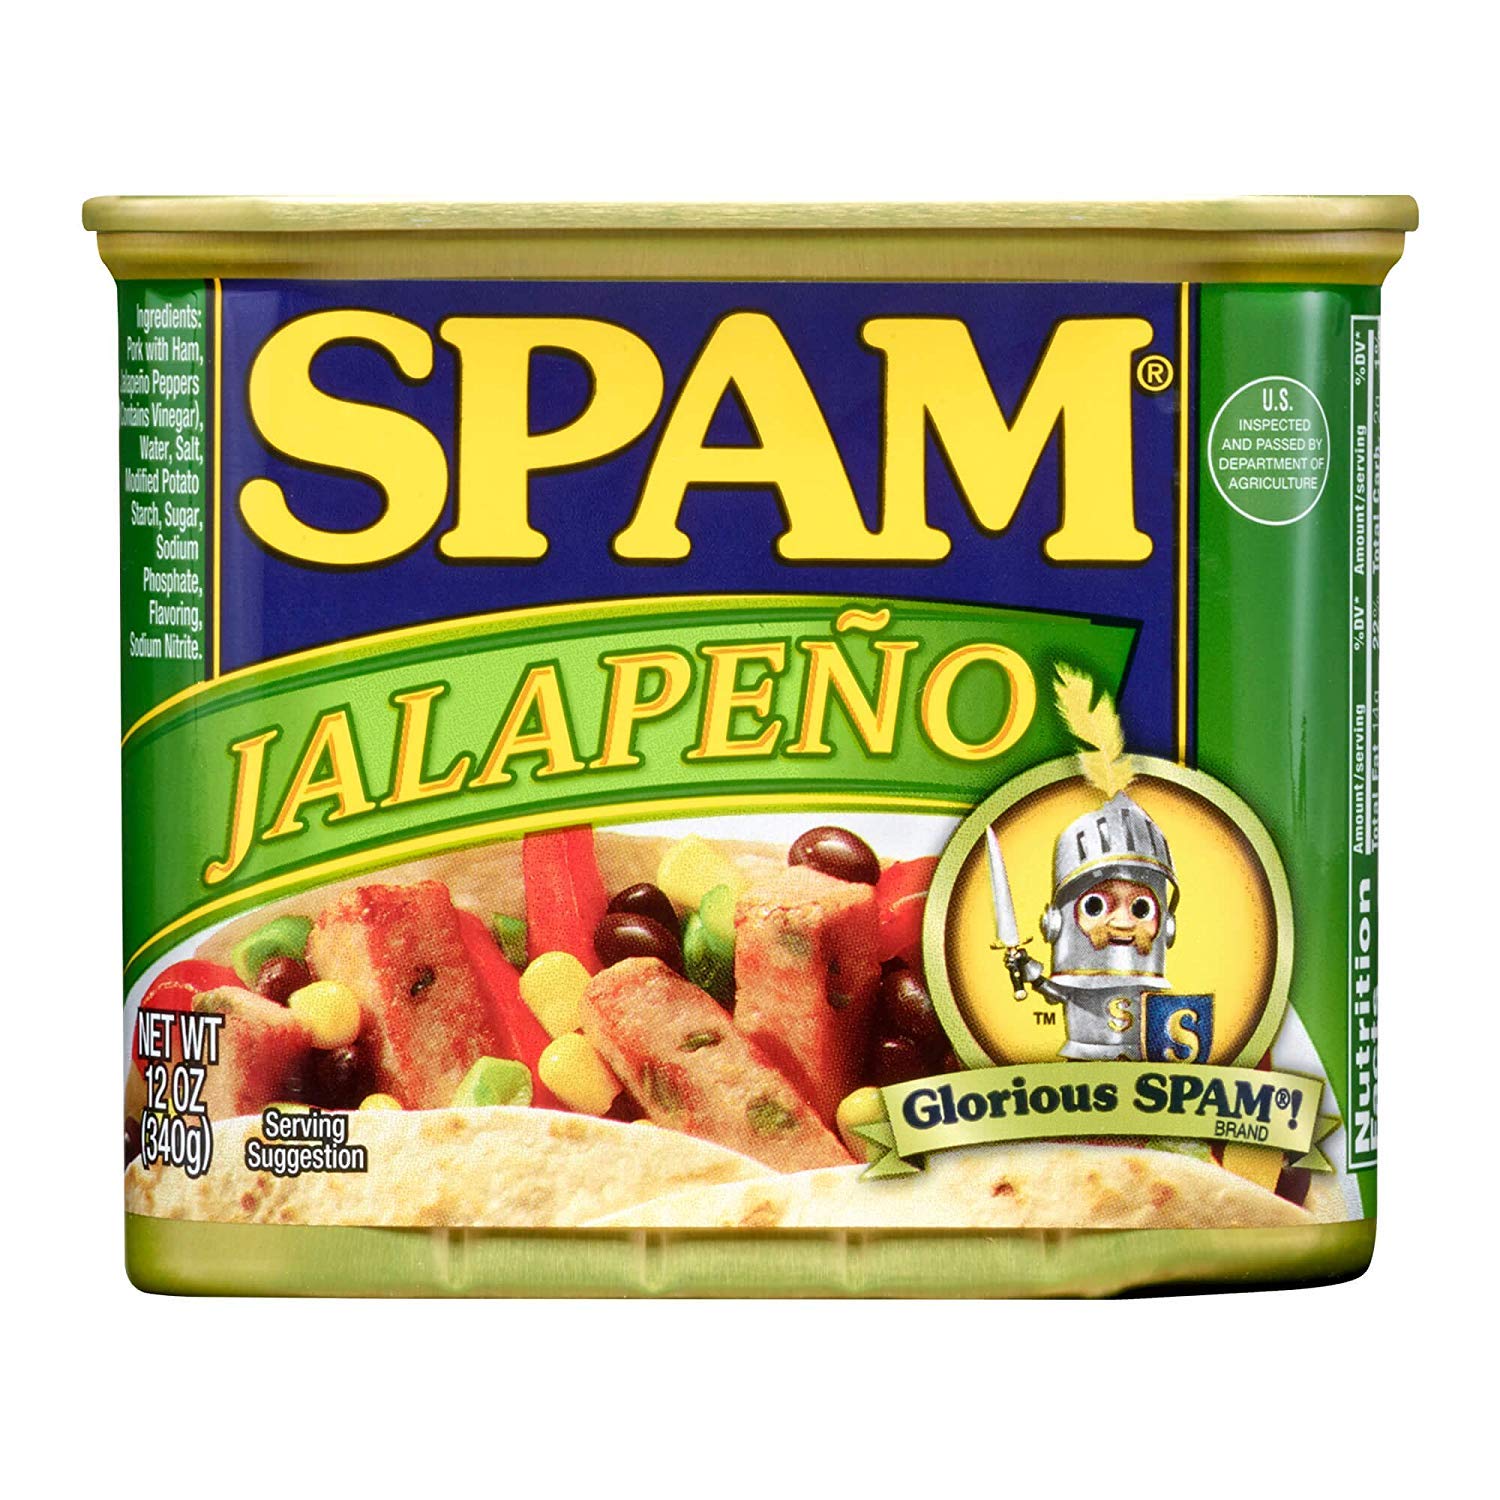 Spam Jalapeño, 12 Ounce Can (Pack of 12)